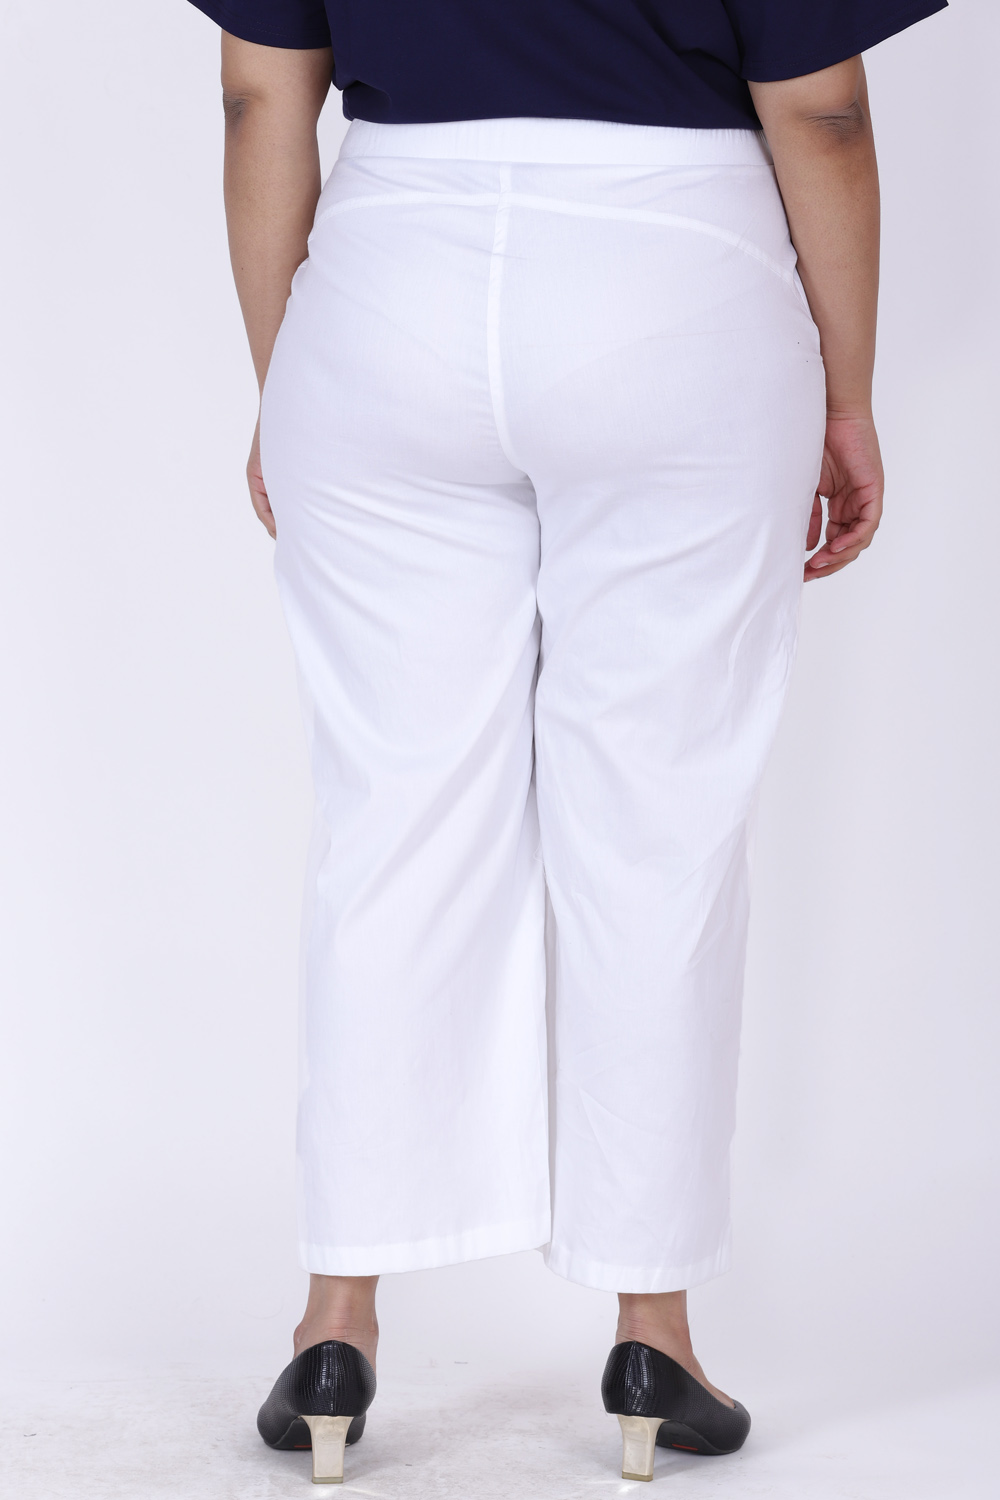 Plus Size - Trouser Straight Deluxe Stretch Mid-Rise Pant - Torrid